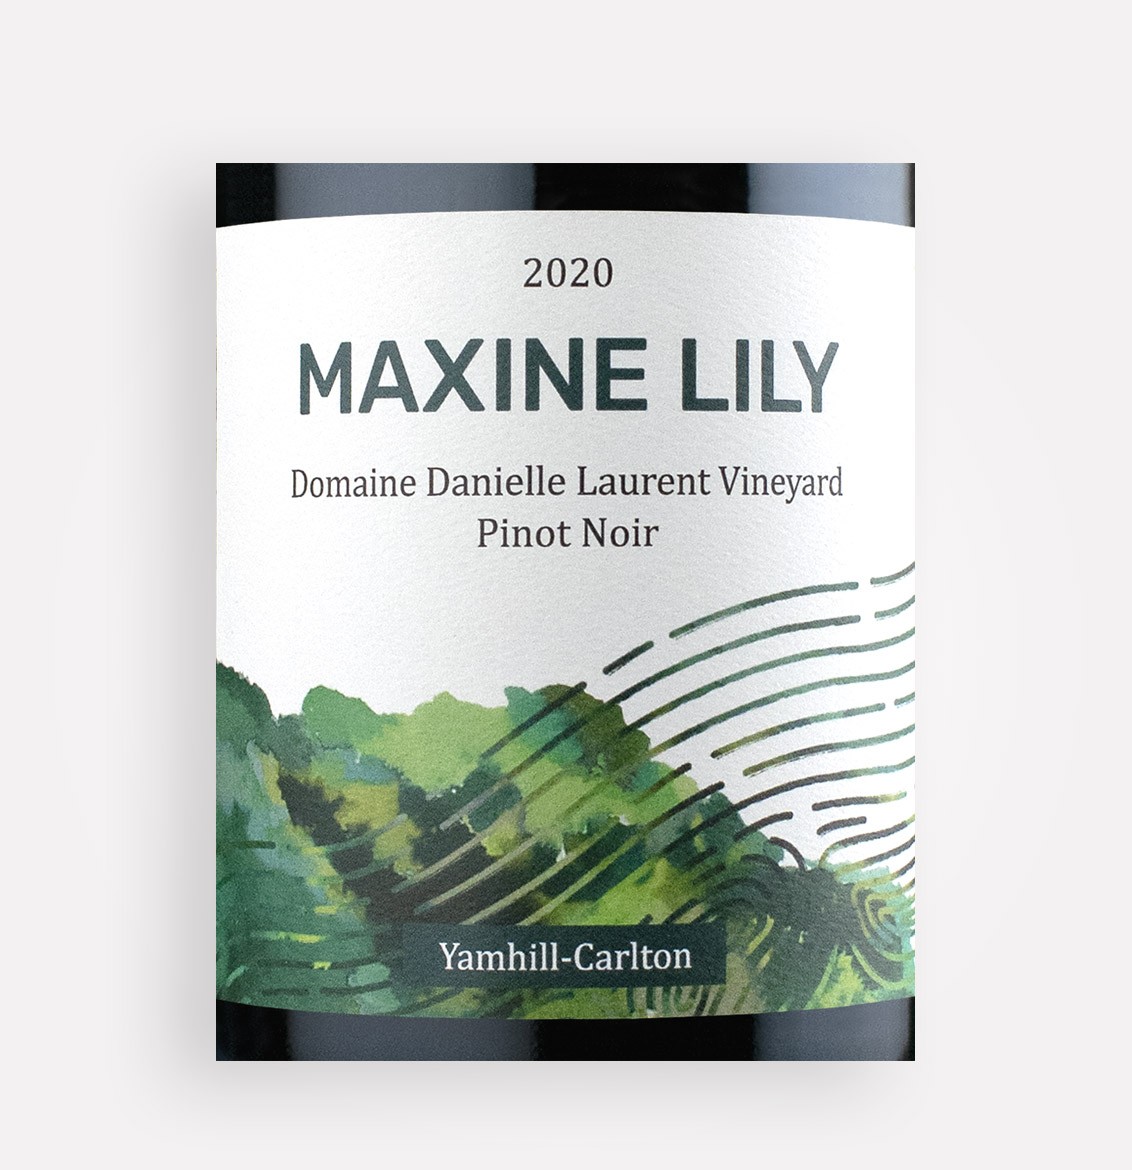 Front label close-up of Maxine Lily 2020 Domaine Danielle Laurent Vineyard Pinot Noir wine from Oregon's Yamhill-Carlton AVA